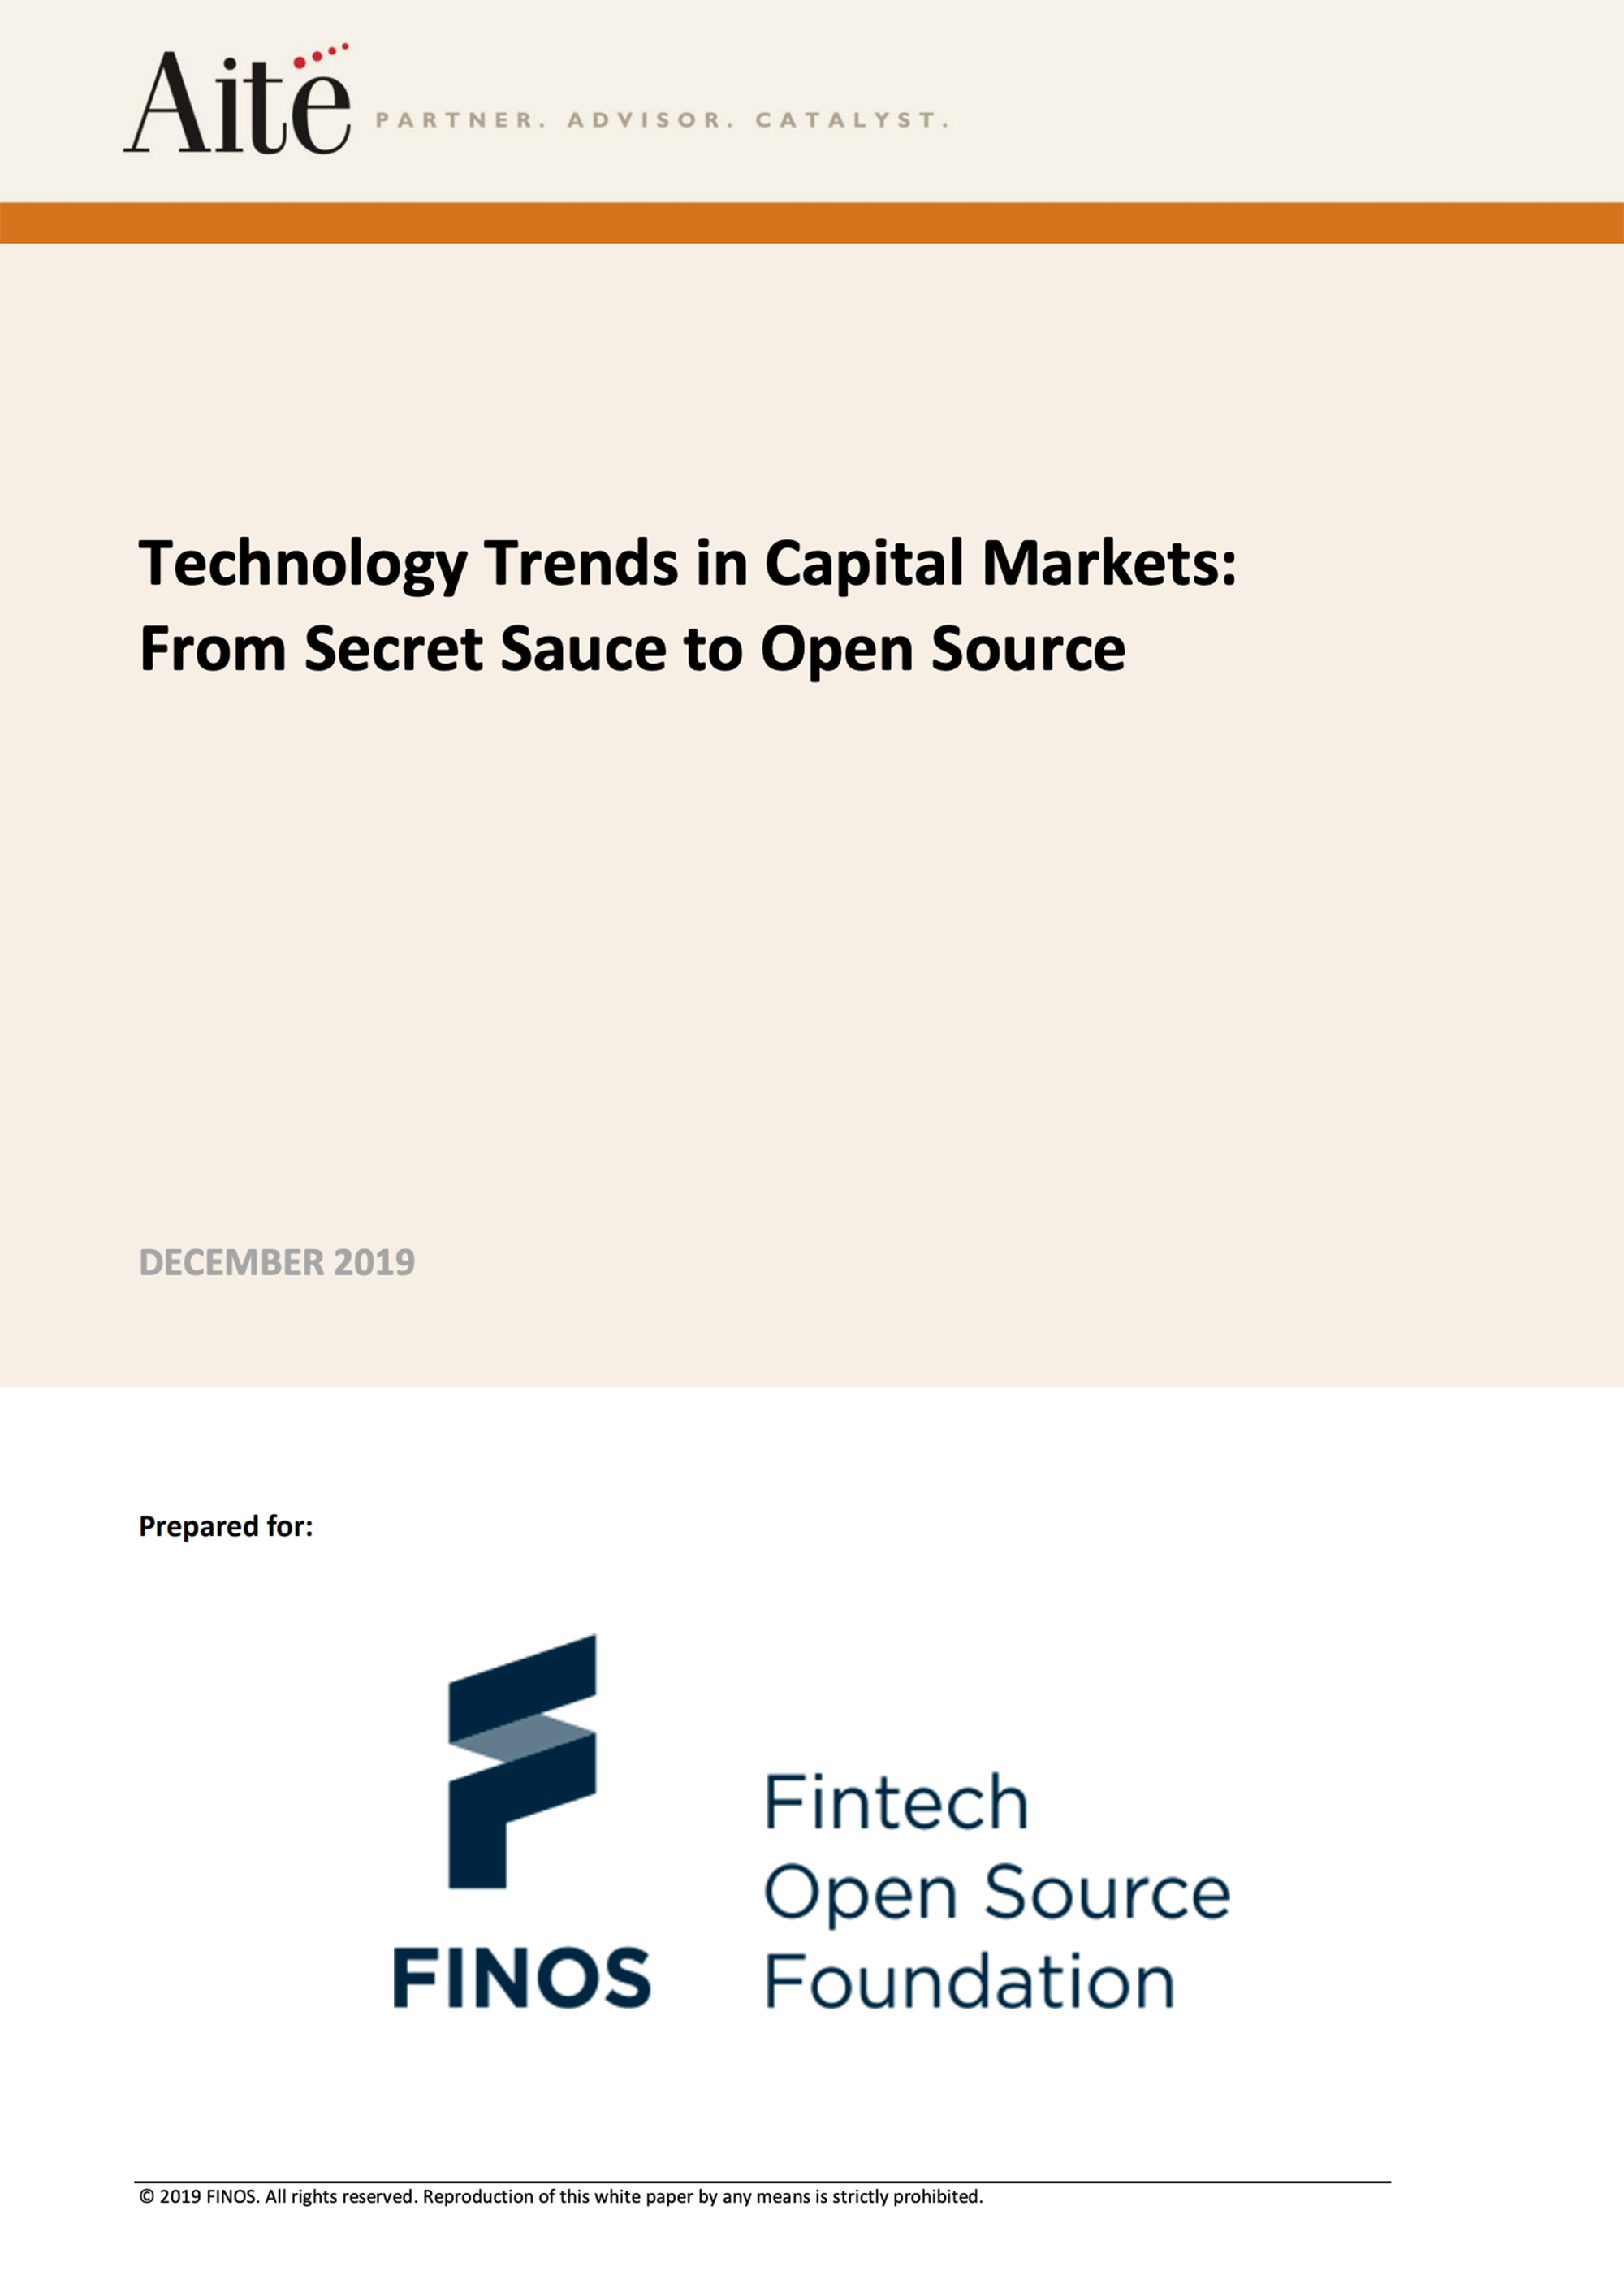 finos-technology-trends-in-capital-markets-report-cover-2